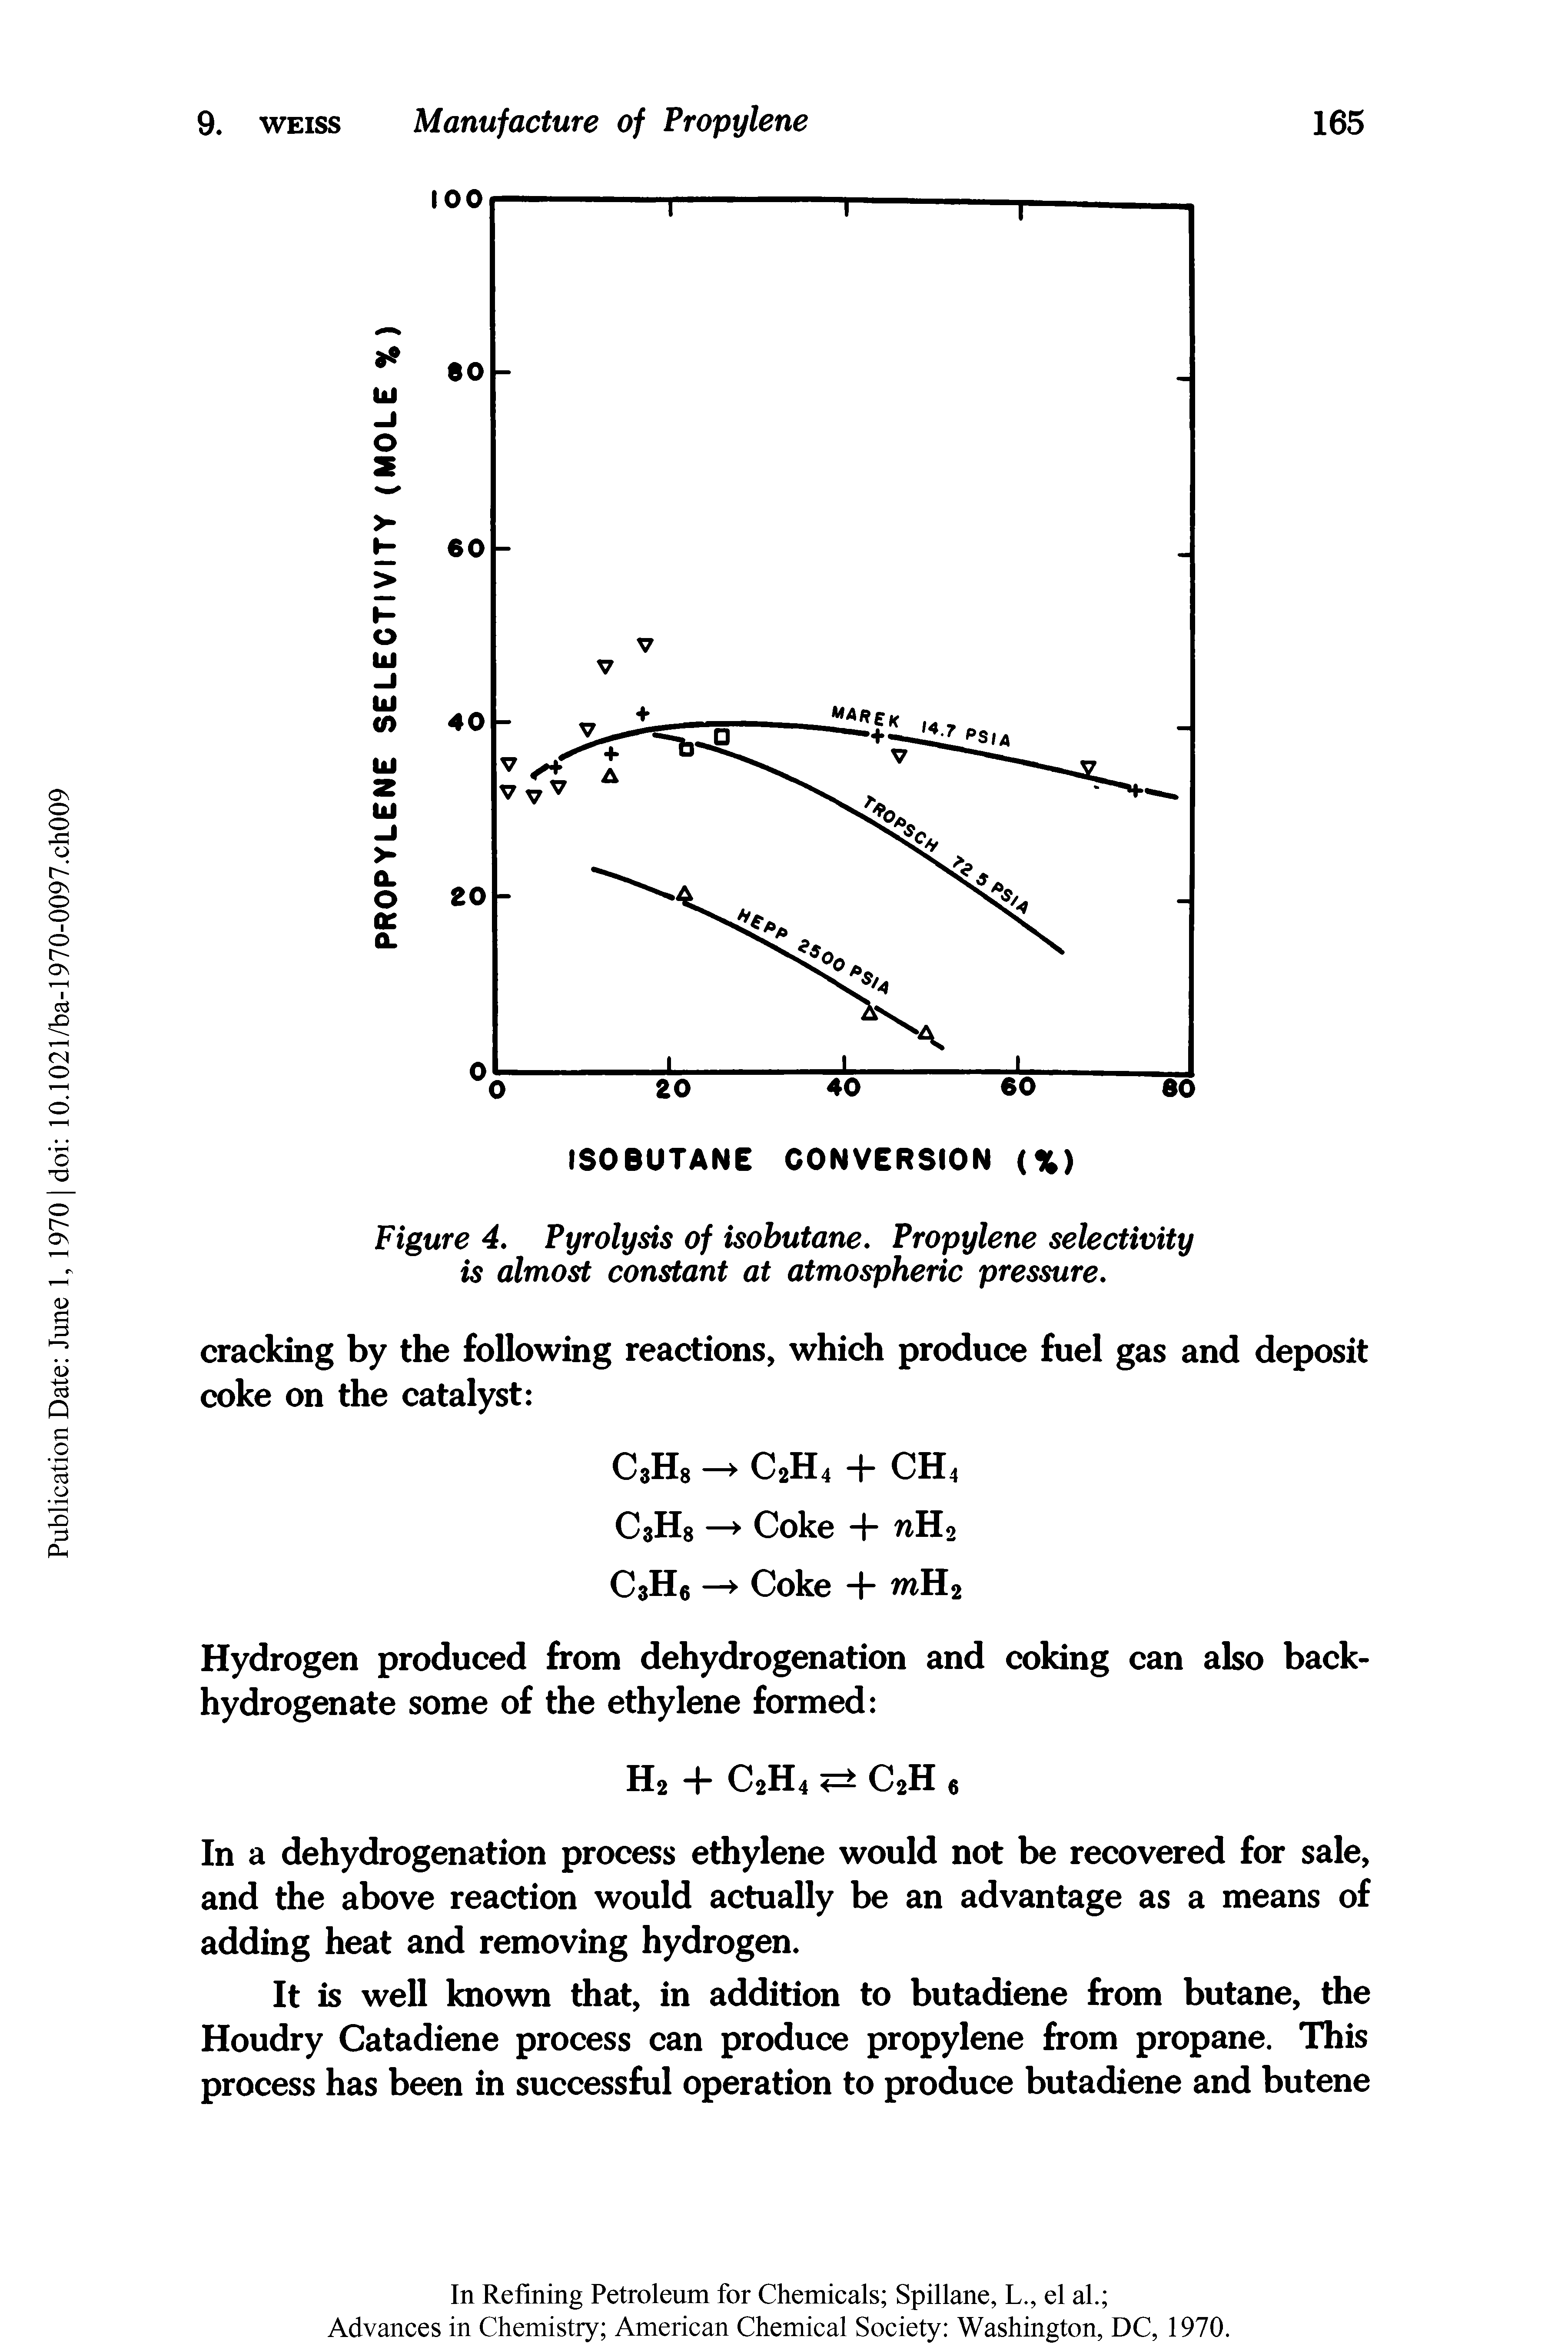 Figure 4. Pyrolysis of isobutane. Propylene selectivity is almost constant at atmospheric pressure.